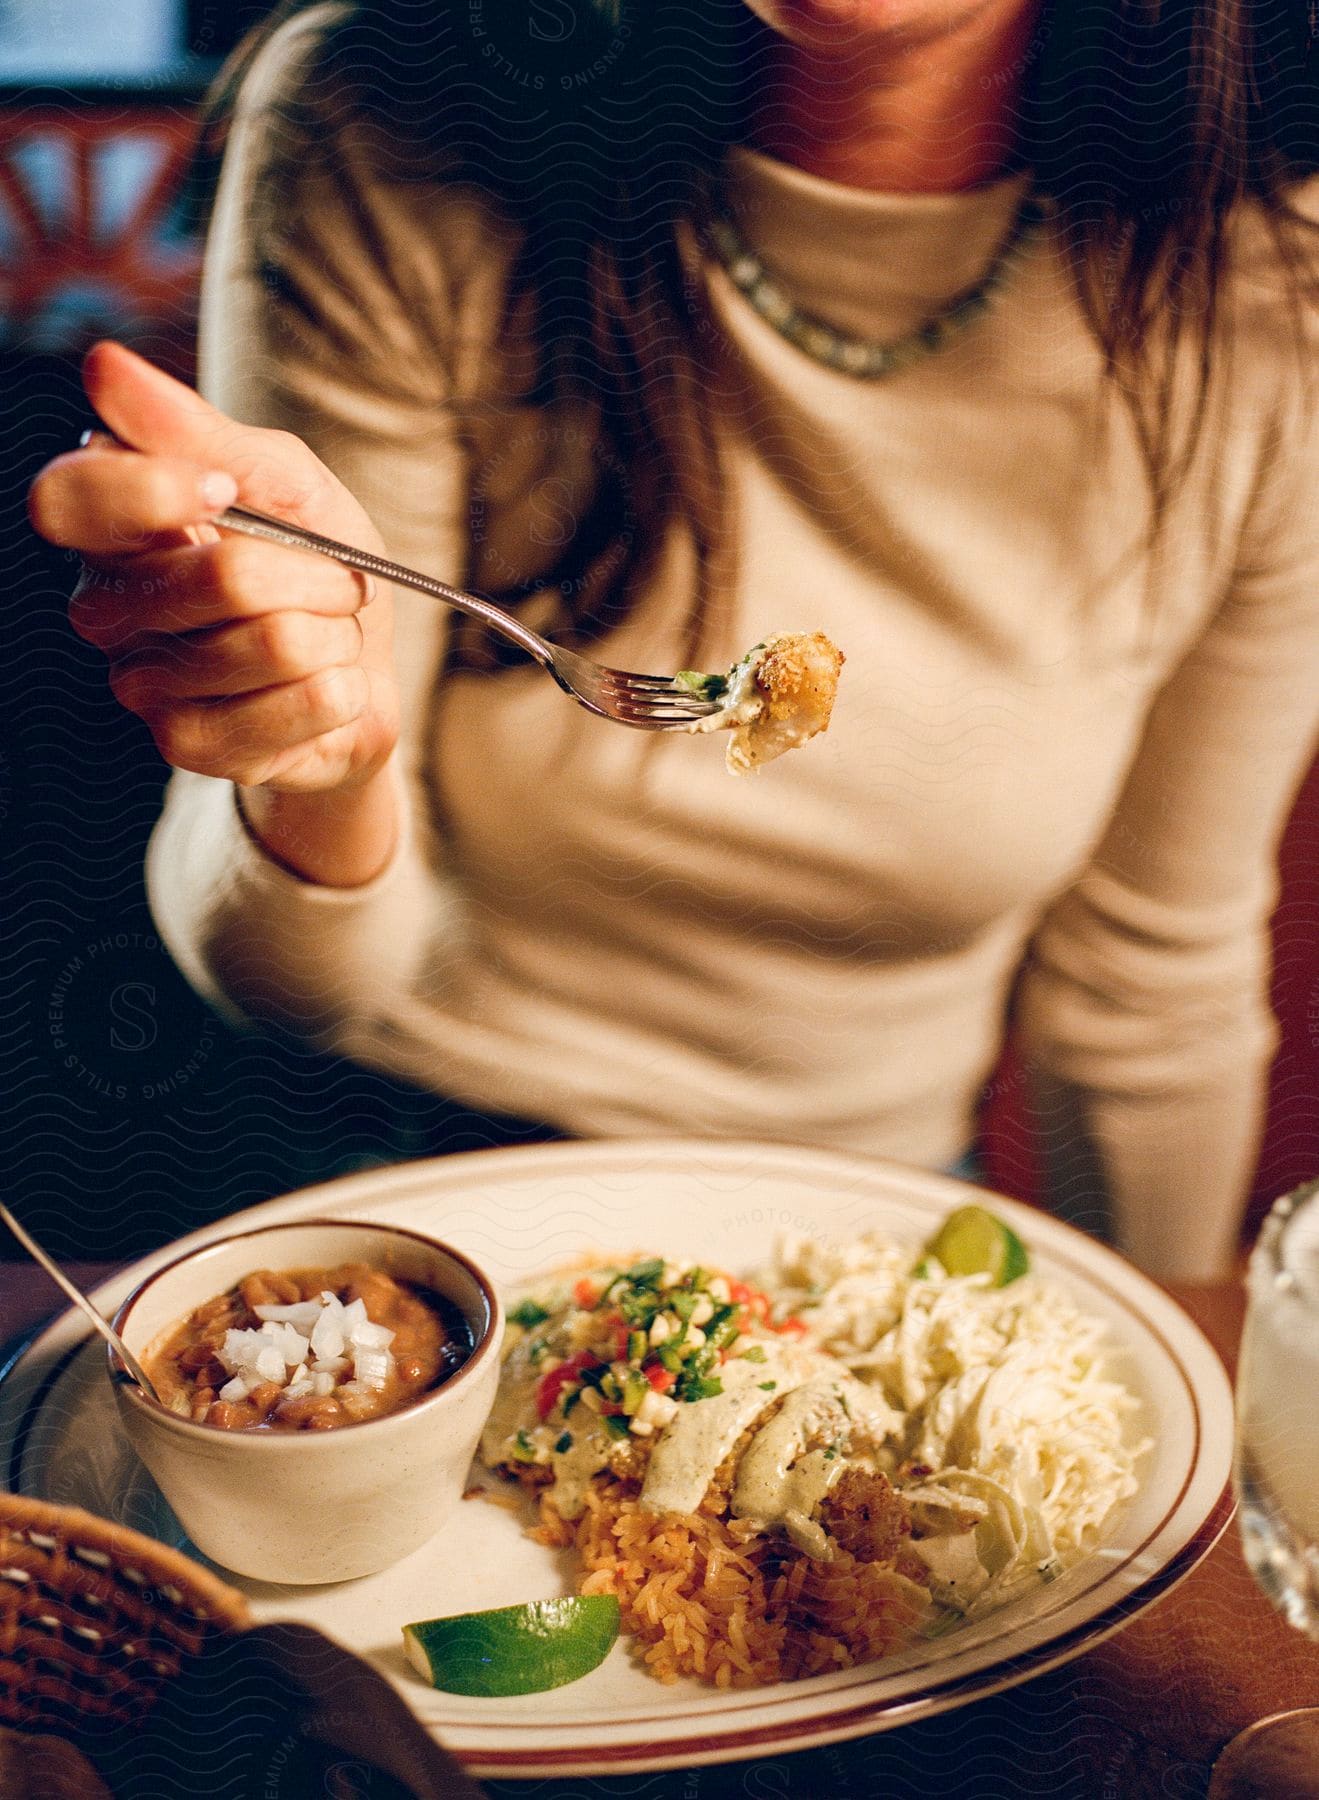 Woman eating a piece of food on a fork with a plate of Mexican cuisine in the background, featuring rice, beans, and enchiladas.